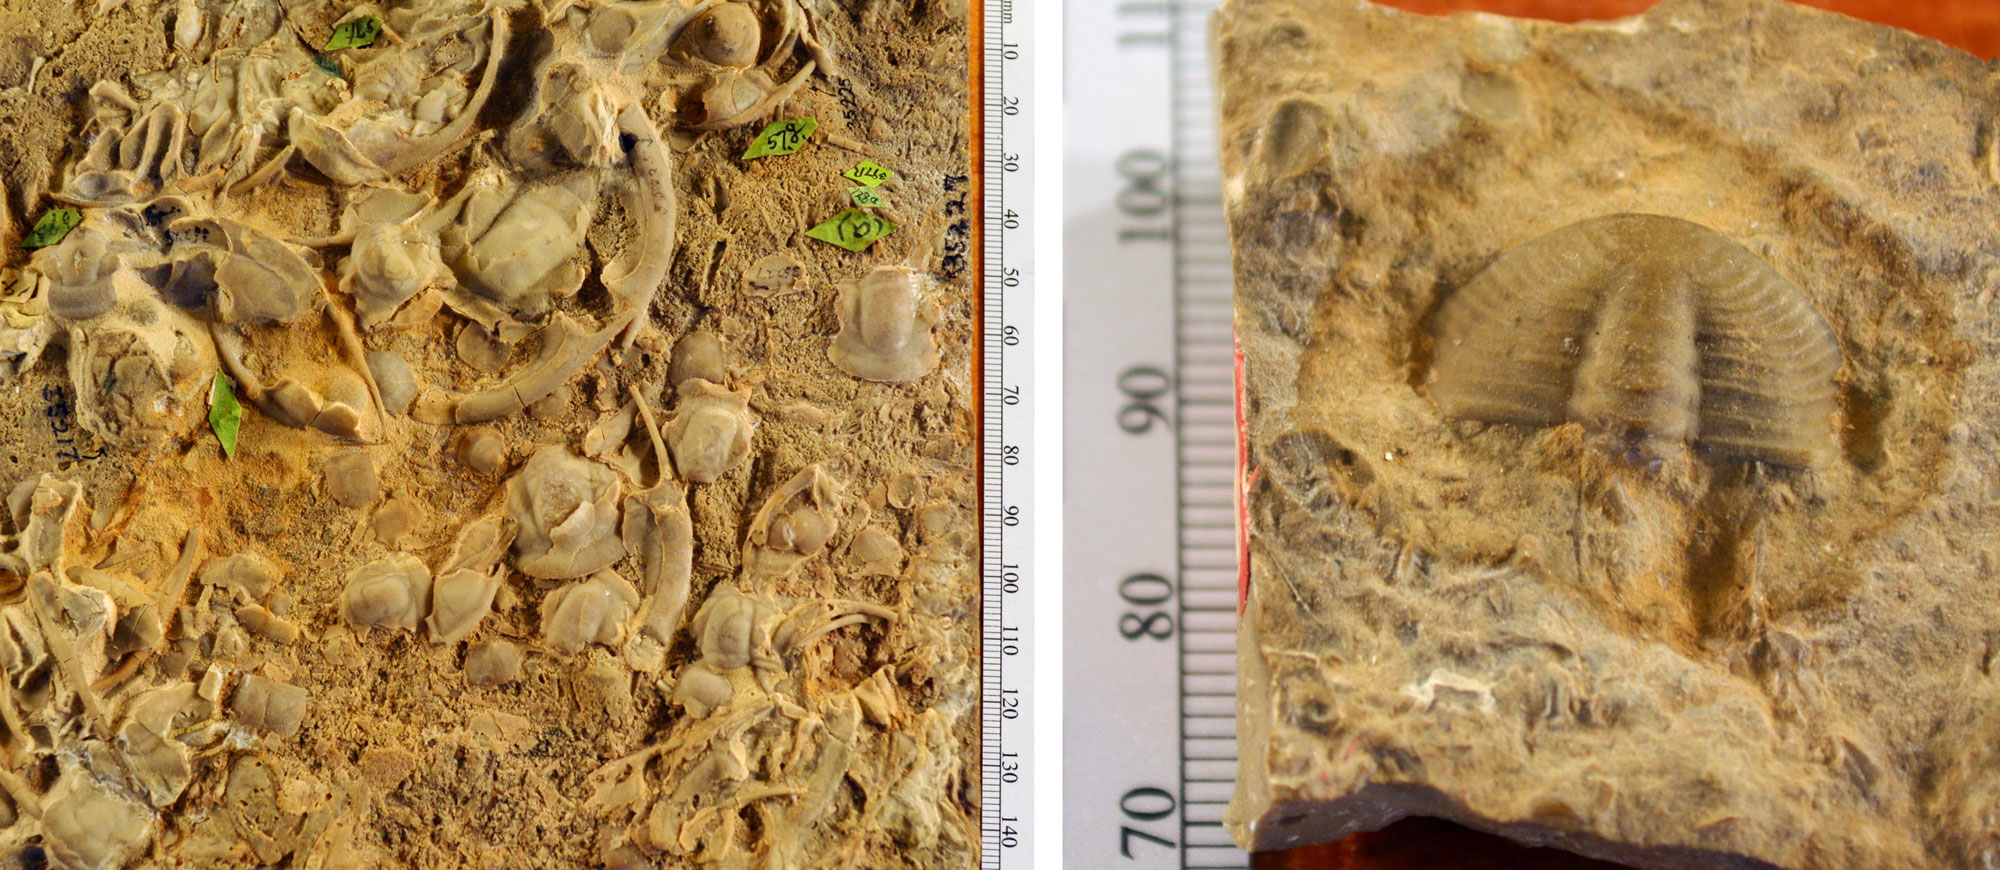 Two-panel image showing photographs of trilobites from the Cambrian of Yellowstone National Park. Panel 1: Photo of a rock with "trilobite hash," in other words a mixture of trilobite fragments scattered on the surface. Panel 2: Photo of a trilobite pygidium preserved on the surface of a rock. 